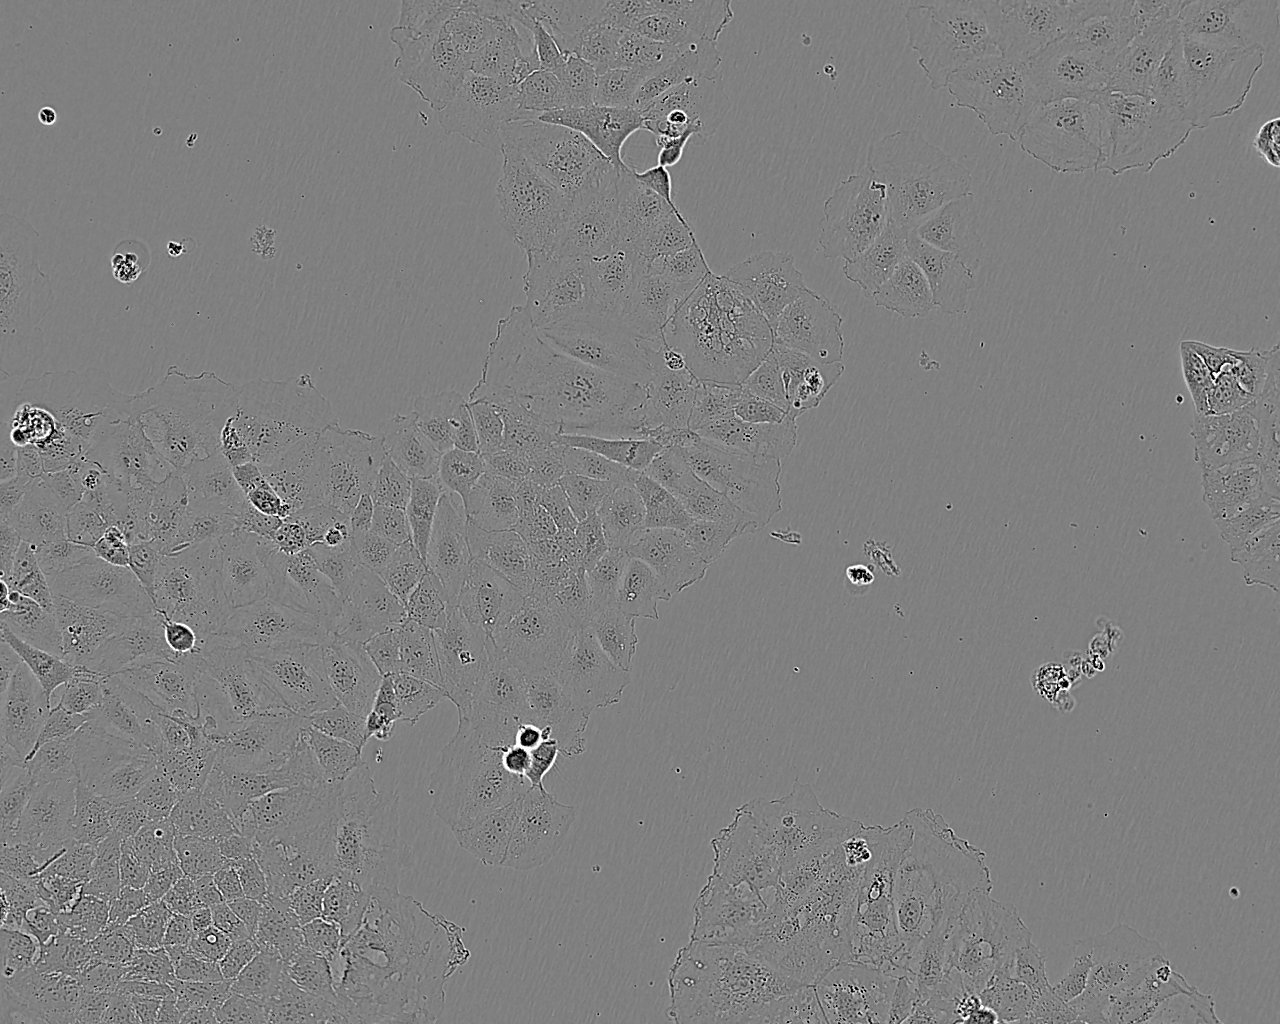 NCI-H2141 Epithelial Cell|人小细胞肺癌传代细胞(有STR鉴定),NCI-H2141 Epithelial Cell